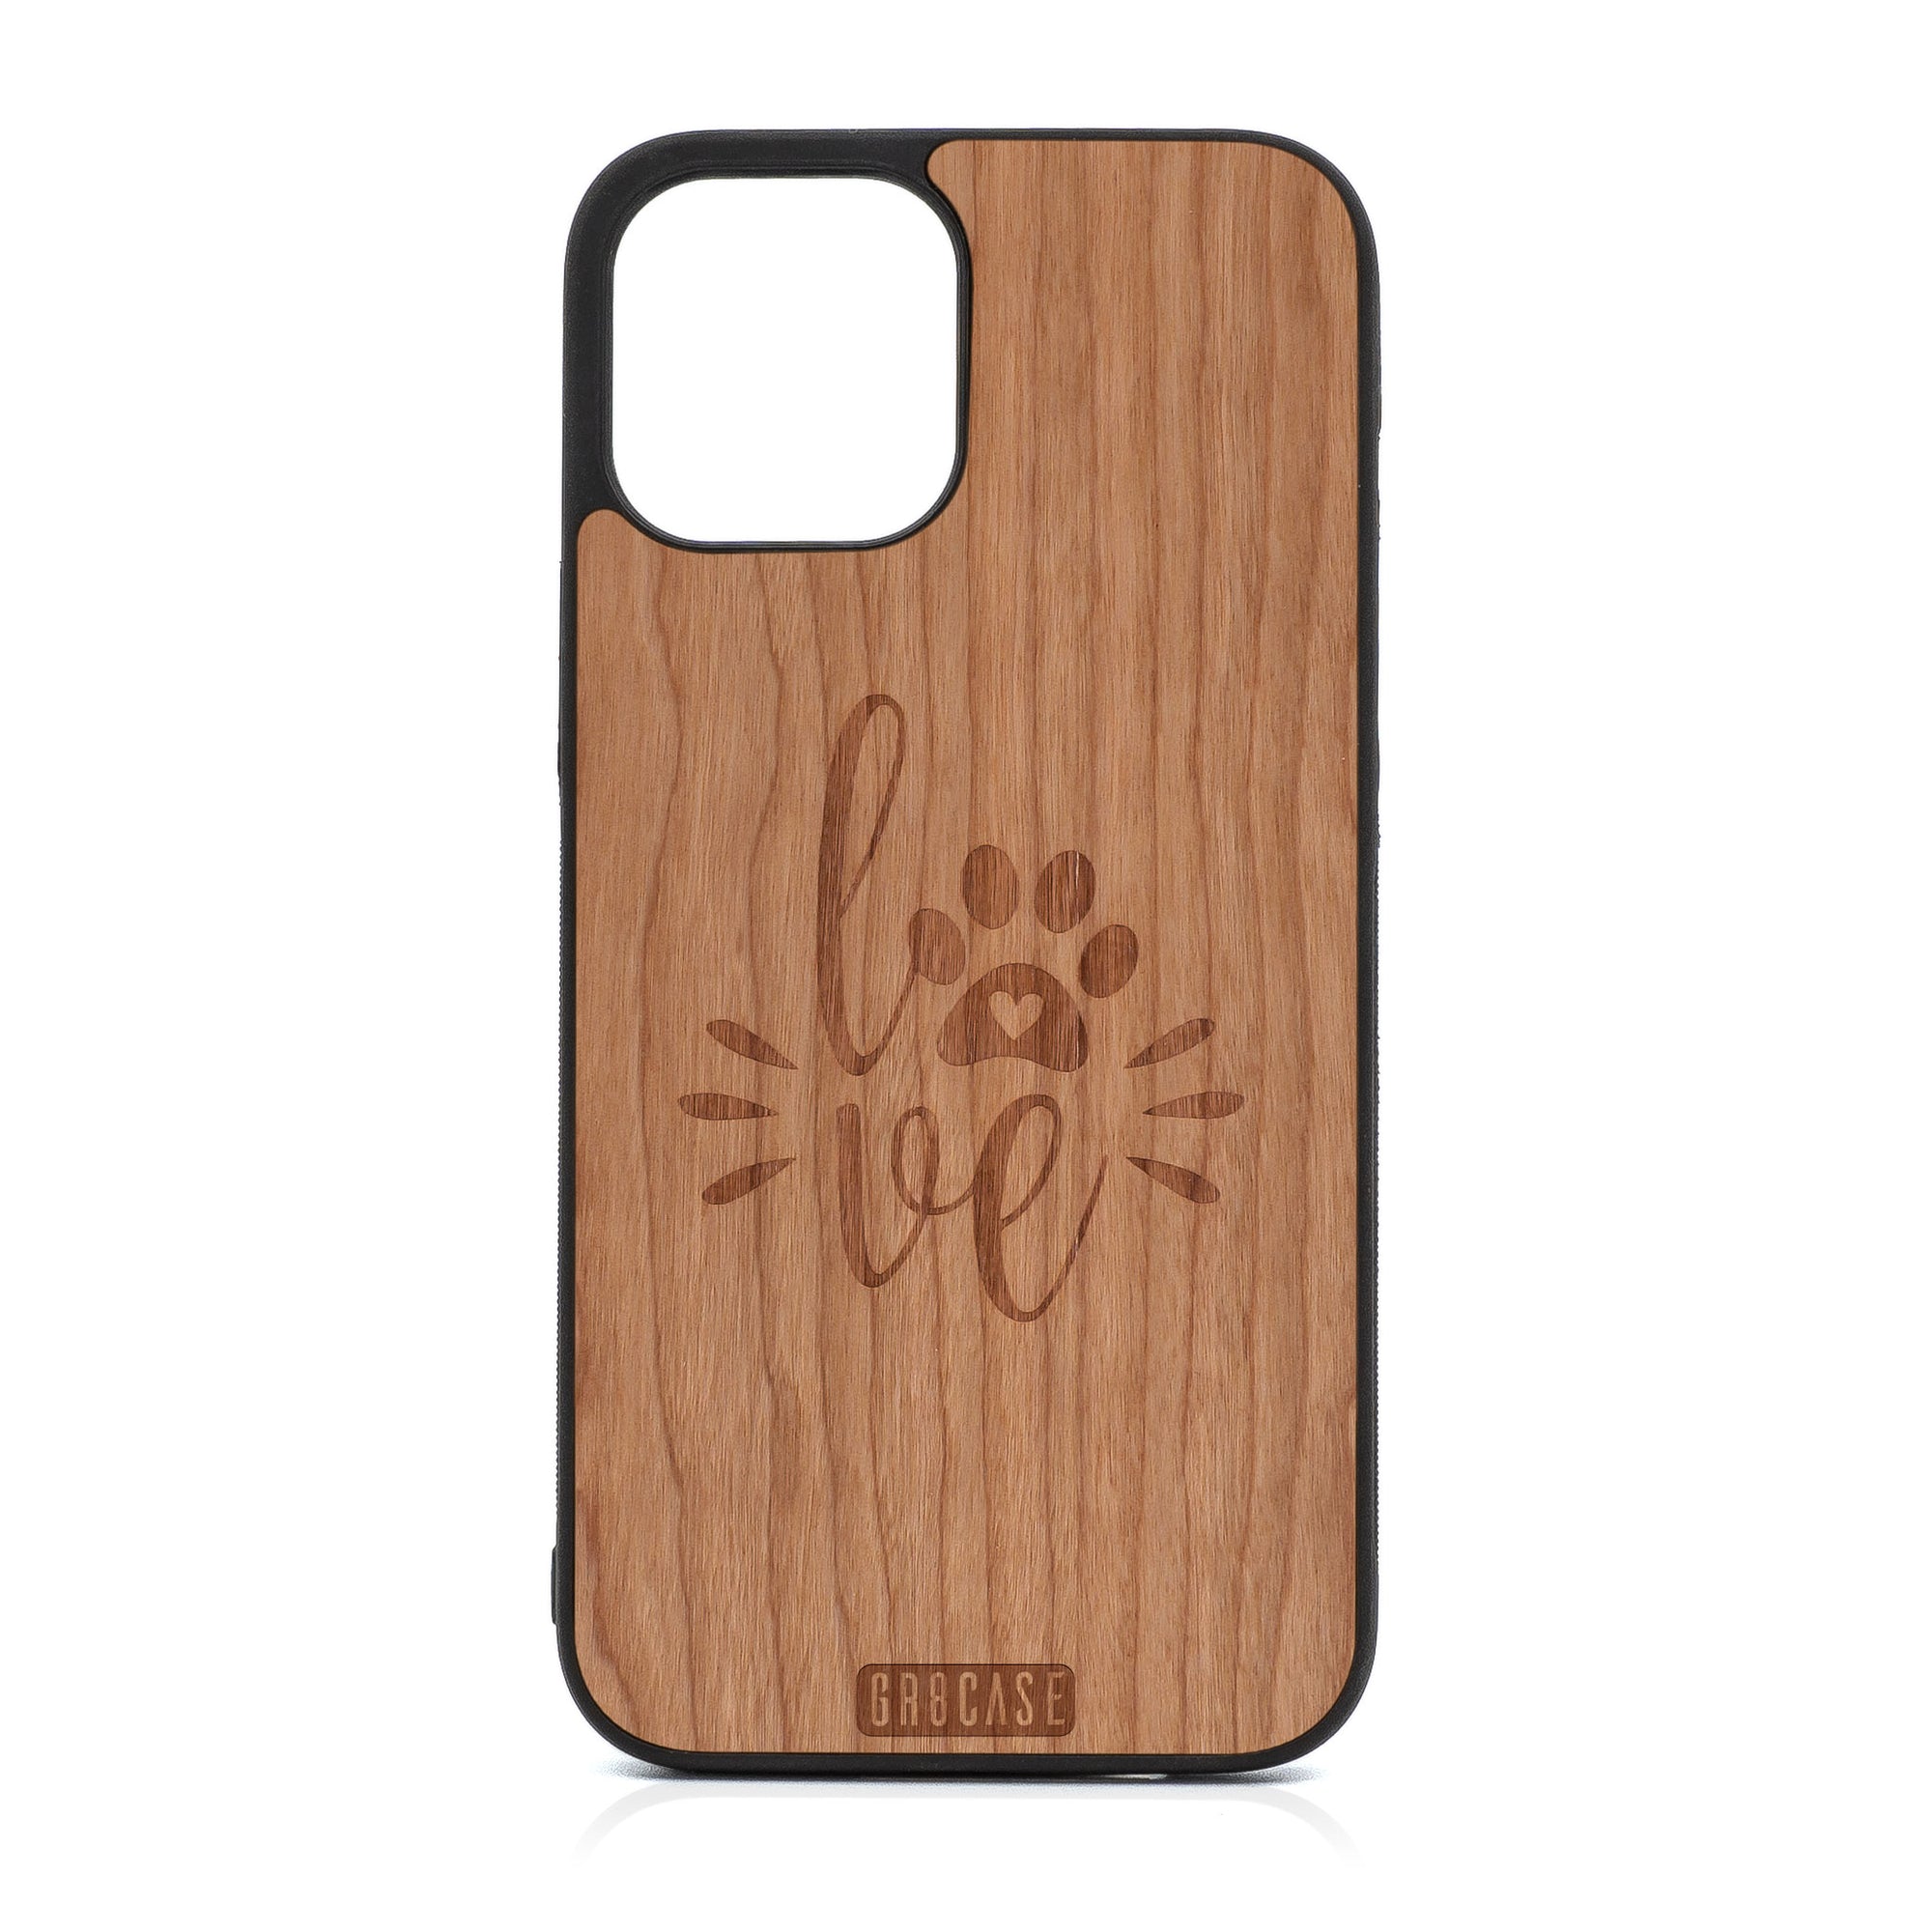 Paw Love Design Wood Case For iPhone 12 Pro Max